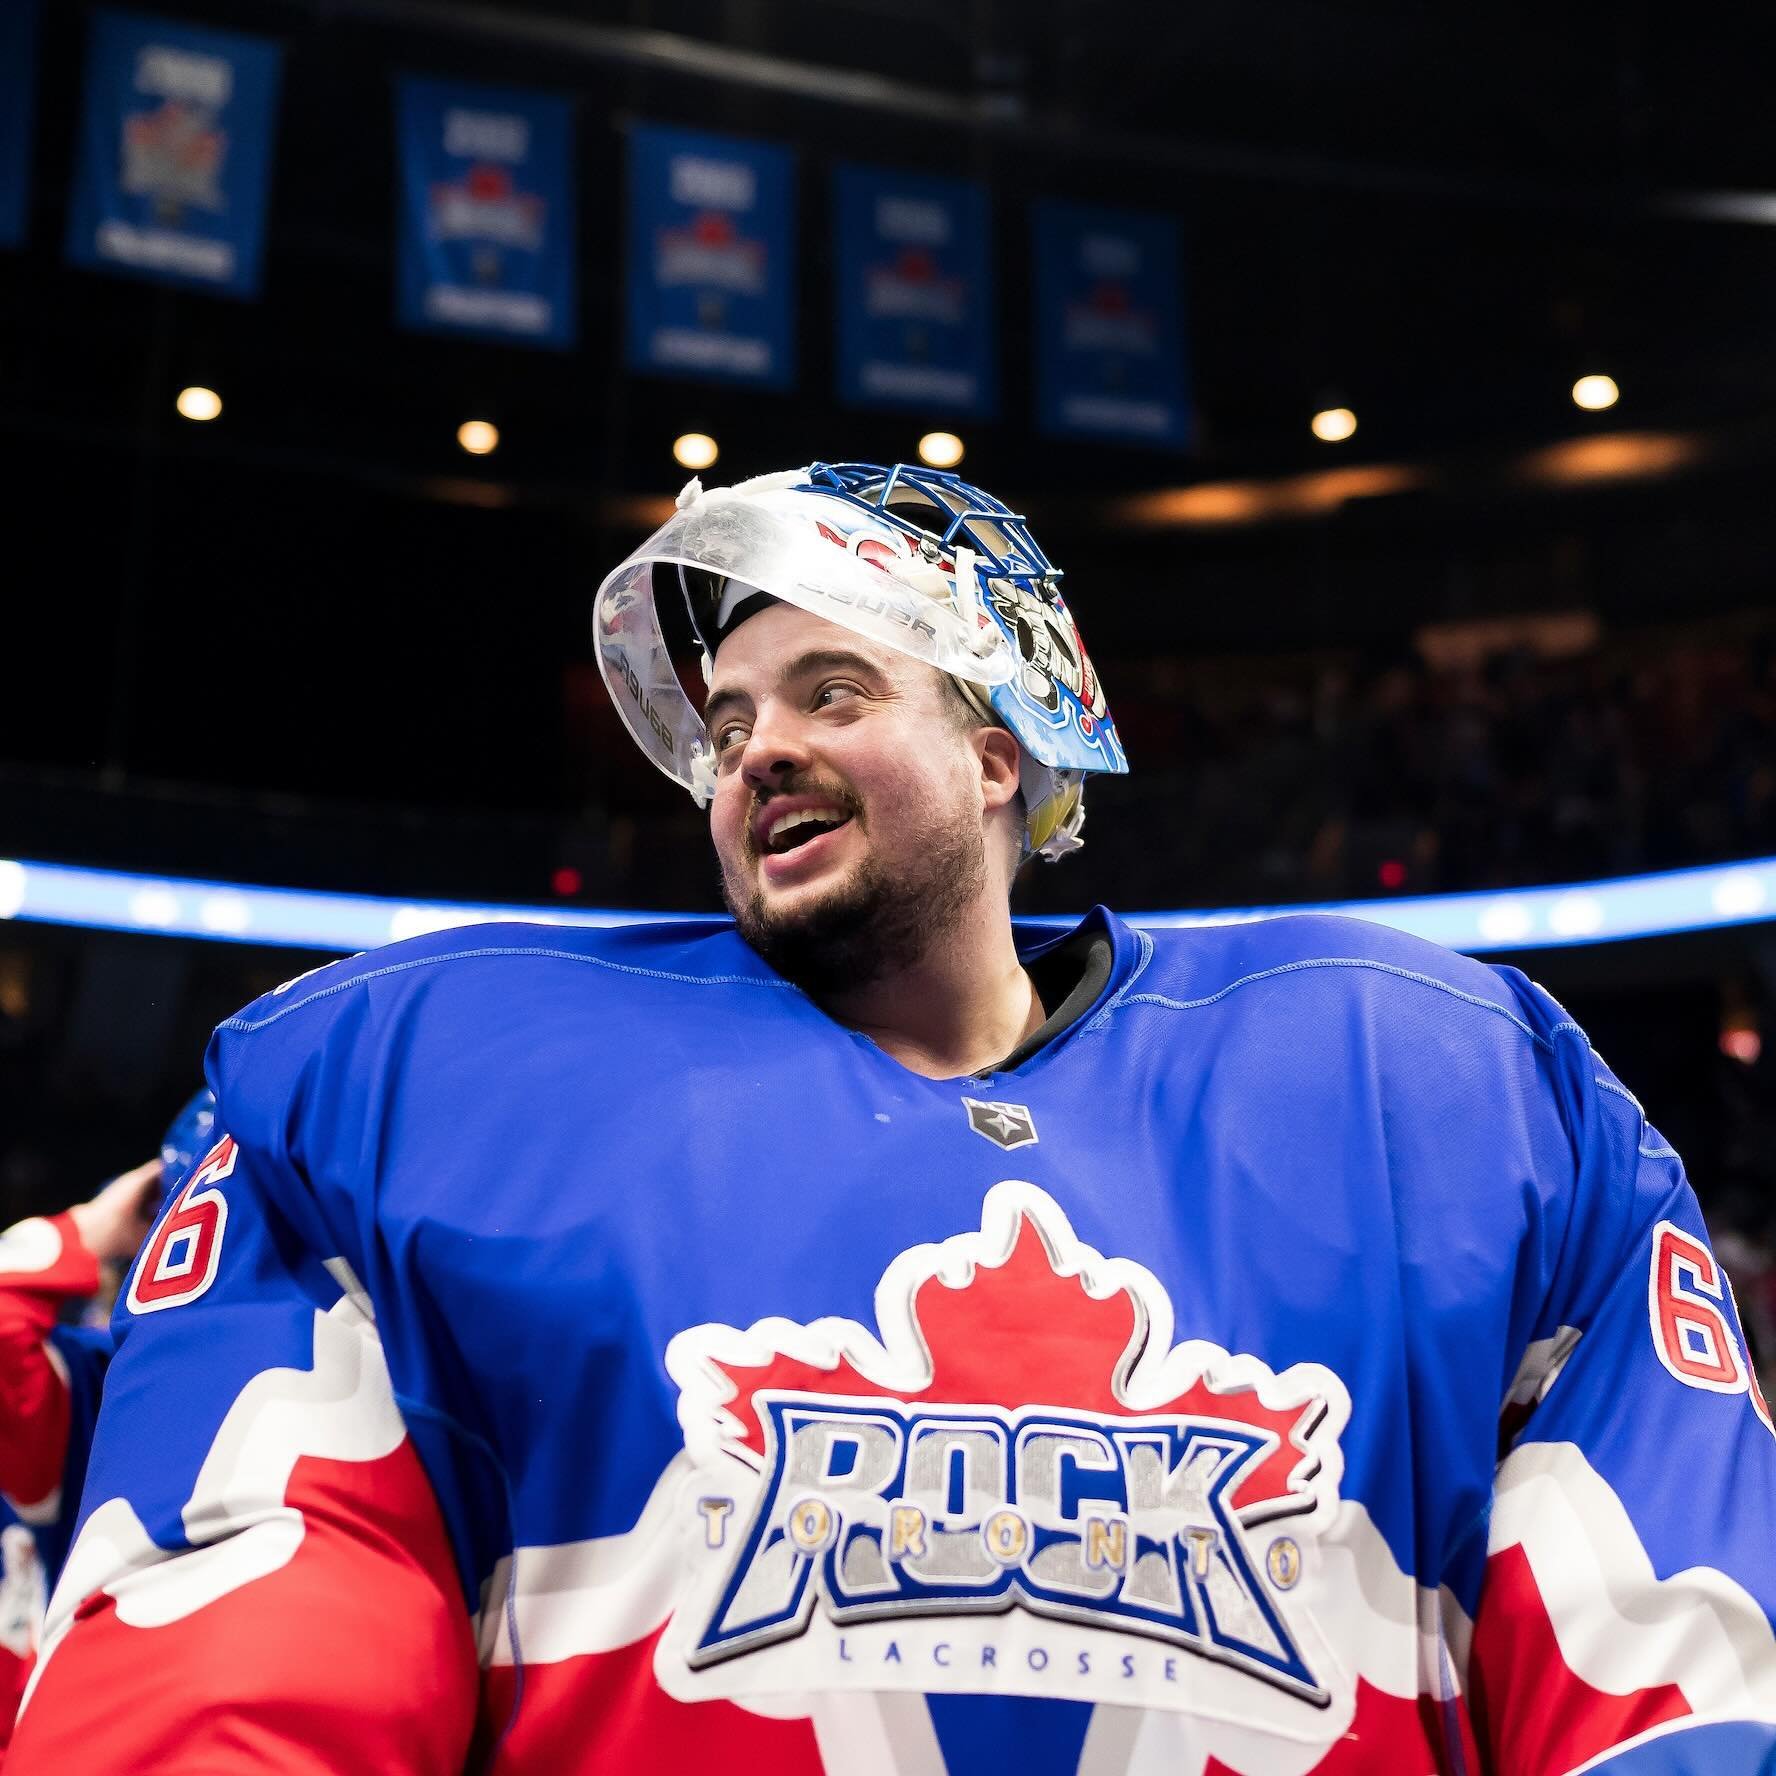 Most saves in a single playoff game by Nick Rose&hellip;
&nbsp;
Today: 51 vs. Rochester (W)
May 11, 2019: 45 at Buffalo (L) May 6, 2022: 41 vs. Halifax (W)
May 21, 2022: 39 vs. Buffalo (L)
May 5, 2012: 36 vs. Buffalo (W)
May 6, 2019: 35 at Georgia (W